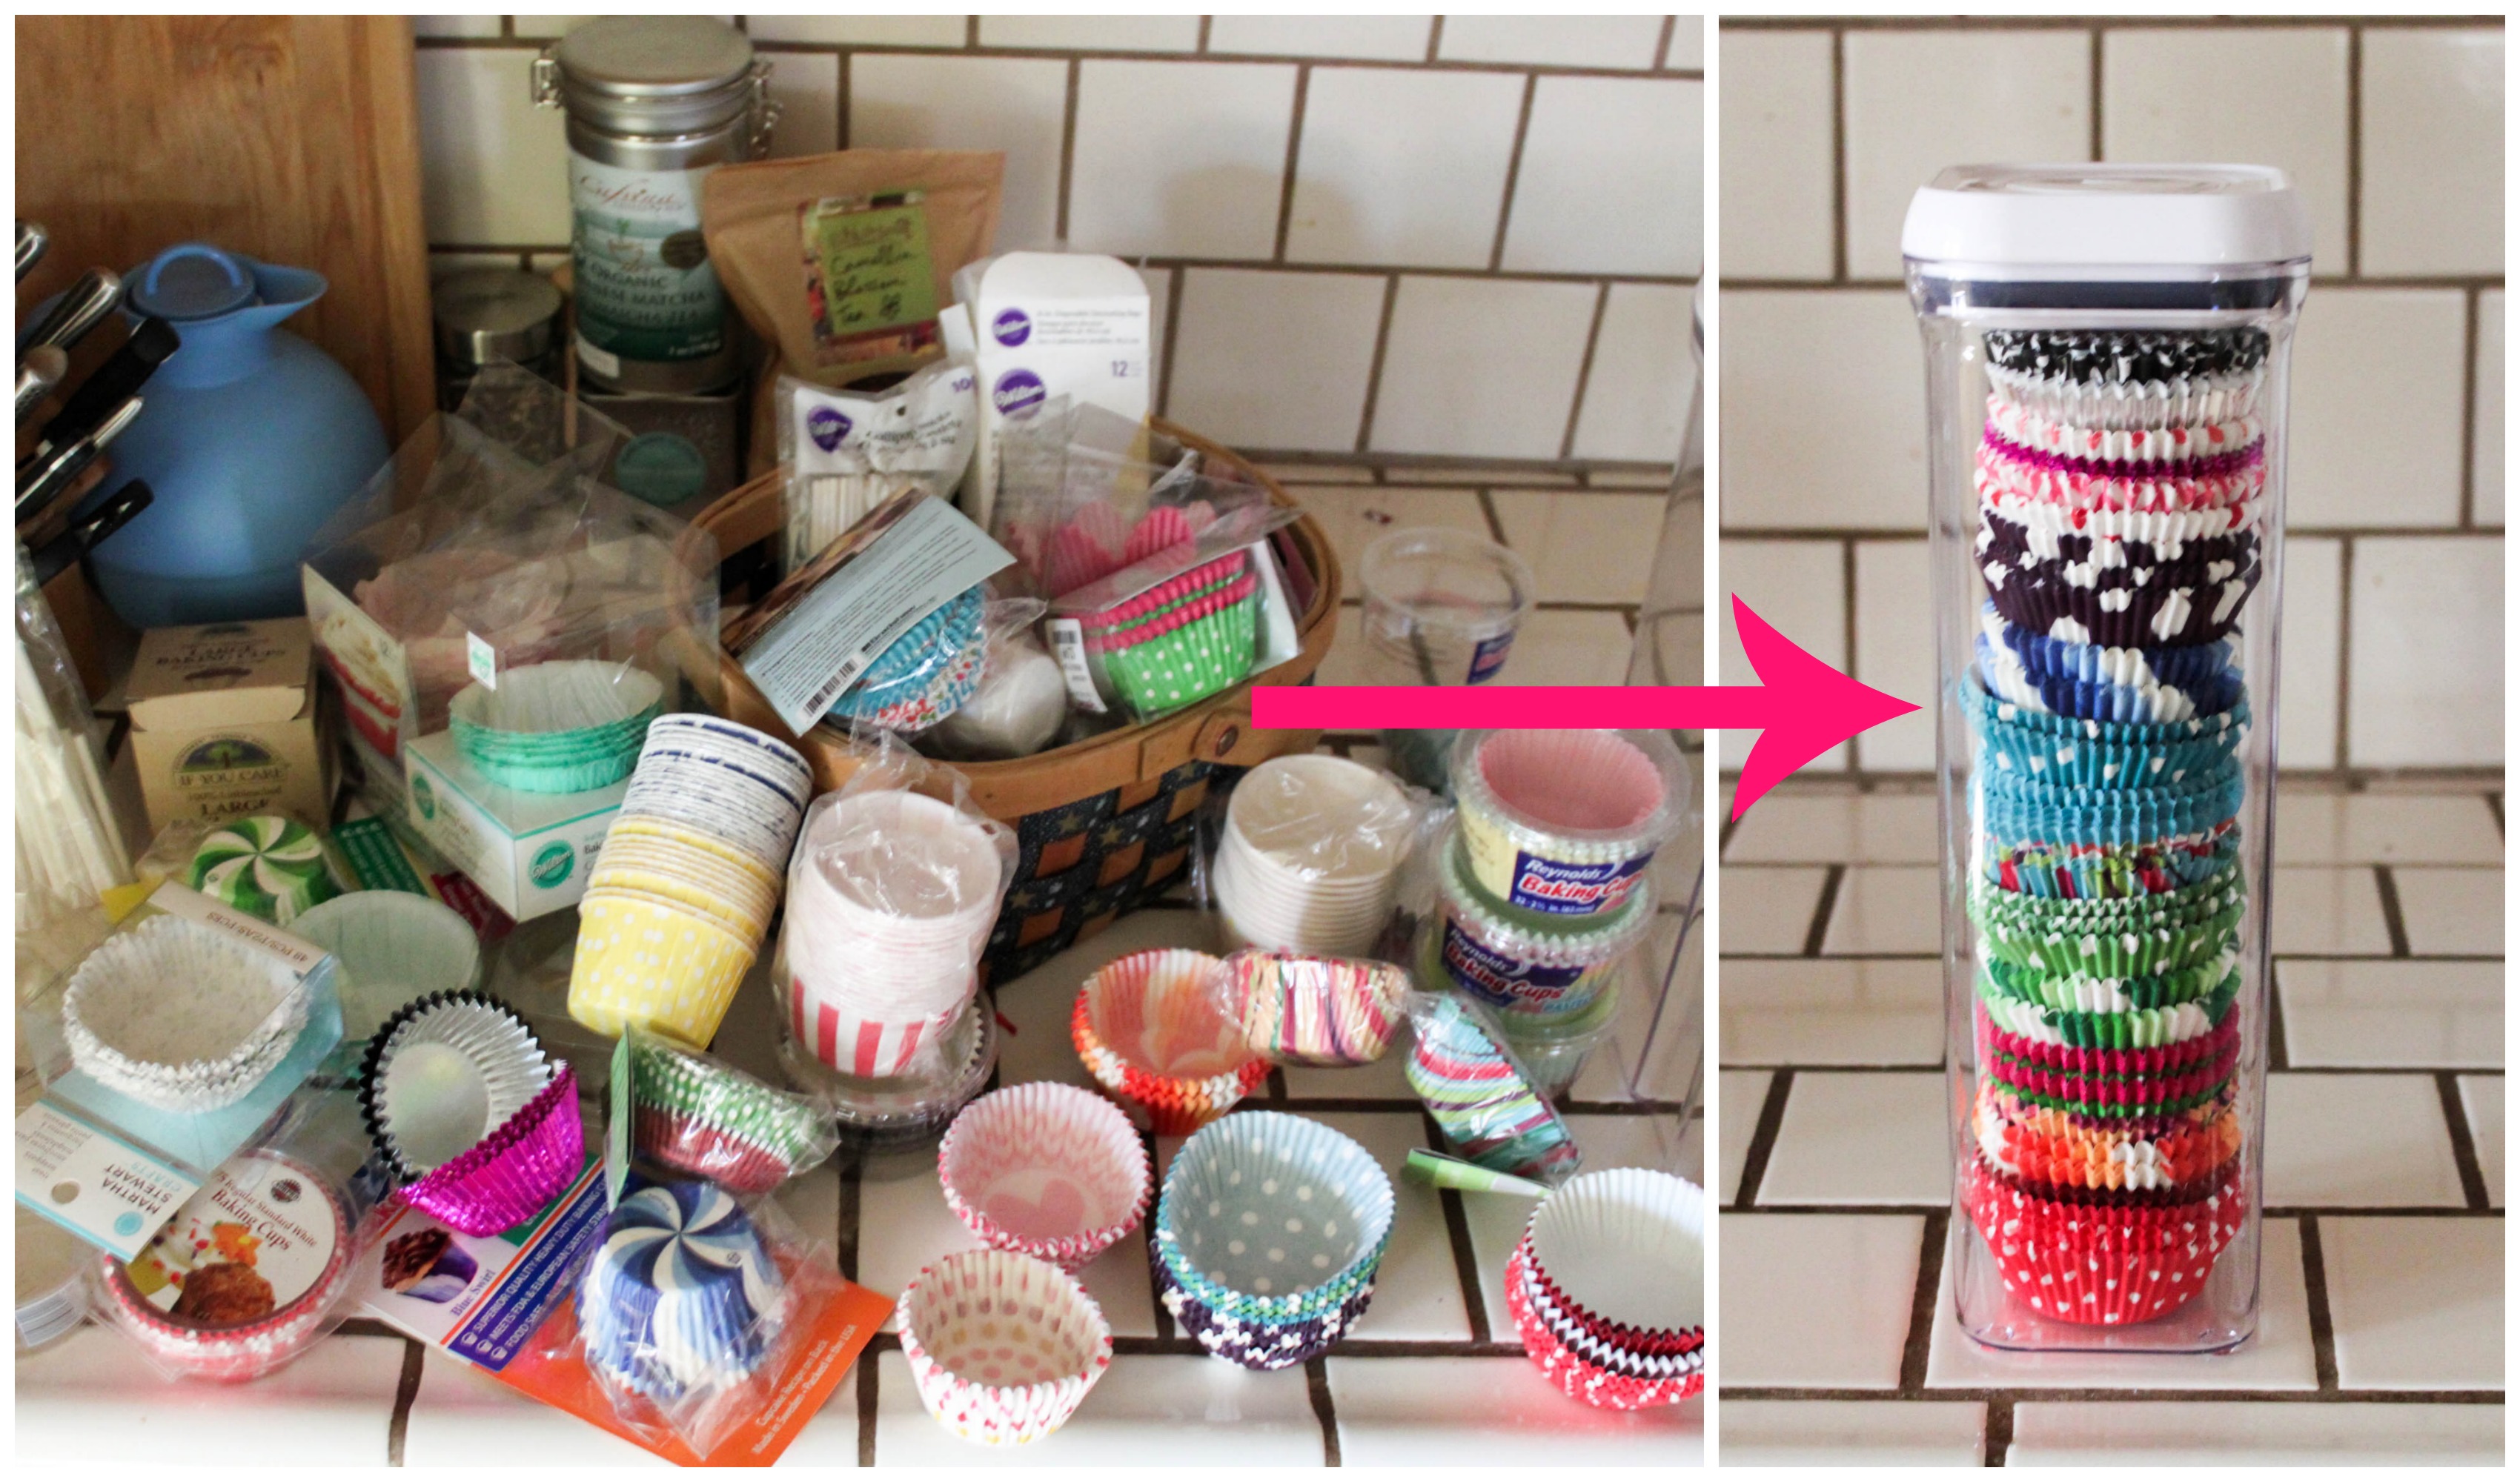 http://www.52kitchenadventures.com/wp-content/uploads/2014/10/How-to-organize-cupcake-liners.jpg